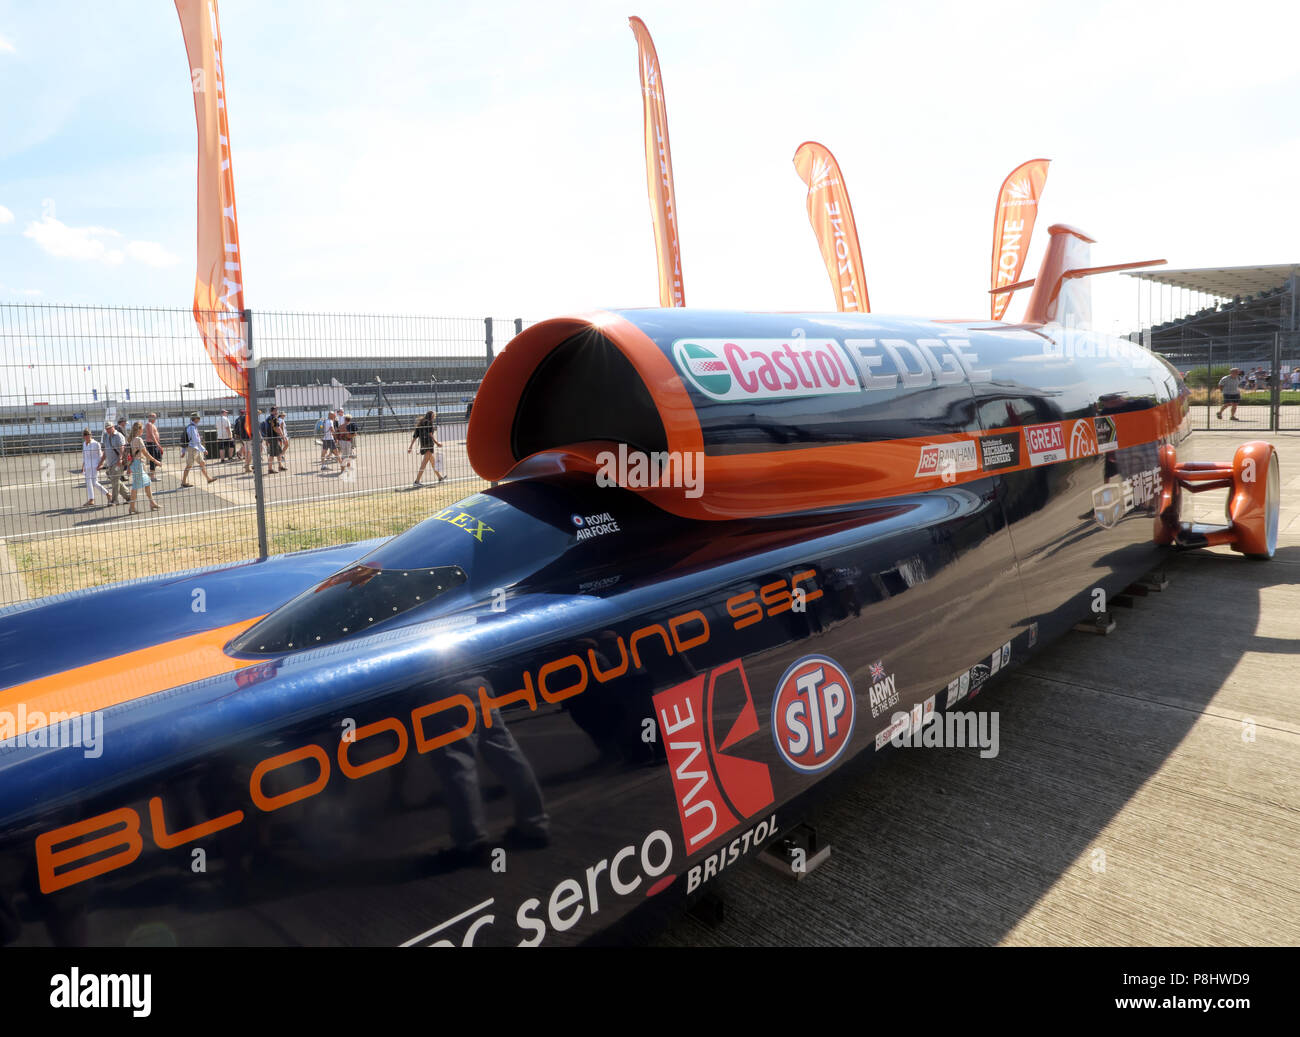 Bloodhound SSC jet car, now LSR, British supersonic land vehicle, at Silverstone racing circuit, UTC, Silverstone Circuit, Towcester ,England,NN12 8TL Stock Photo